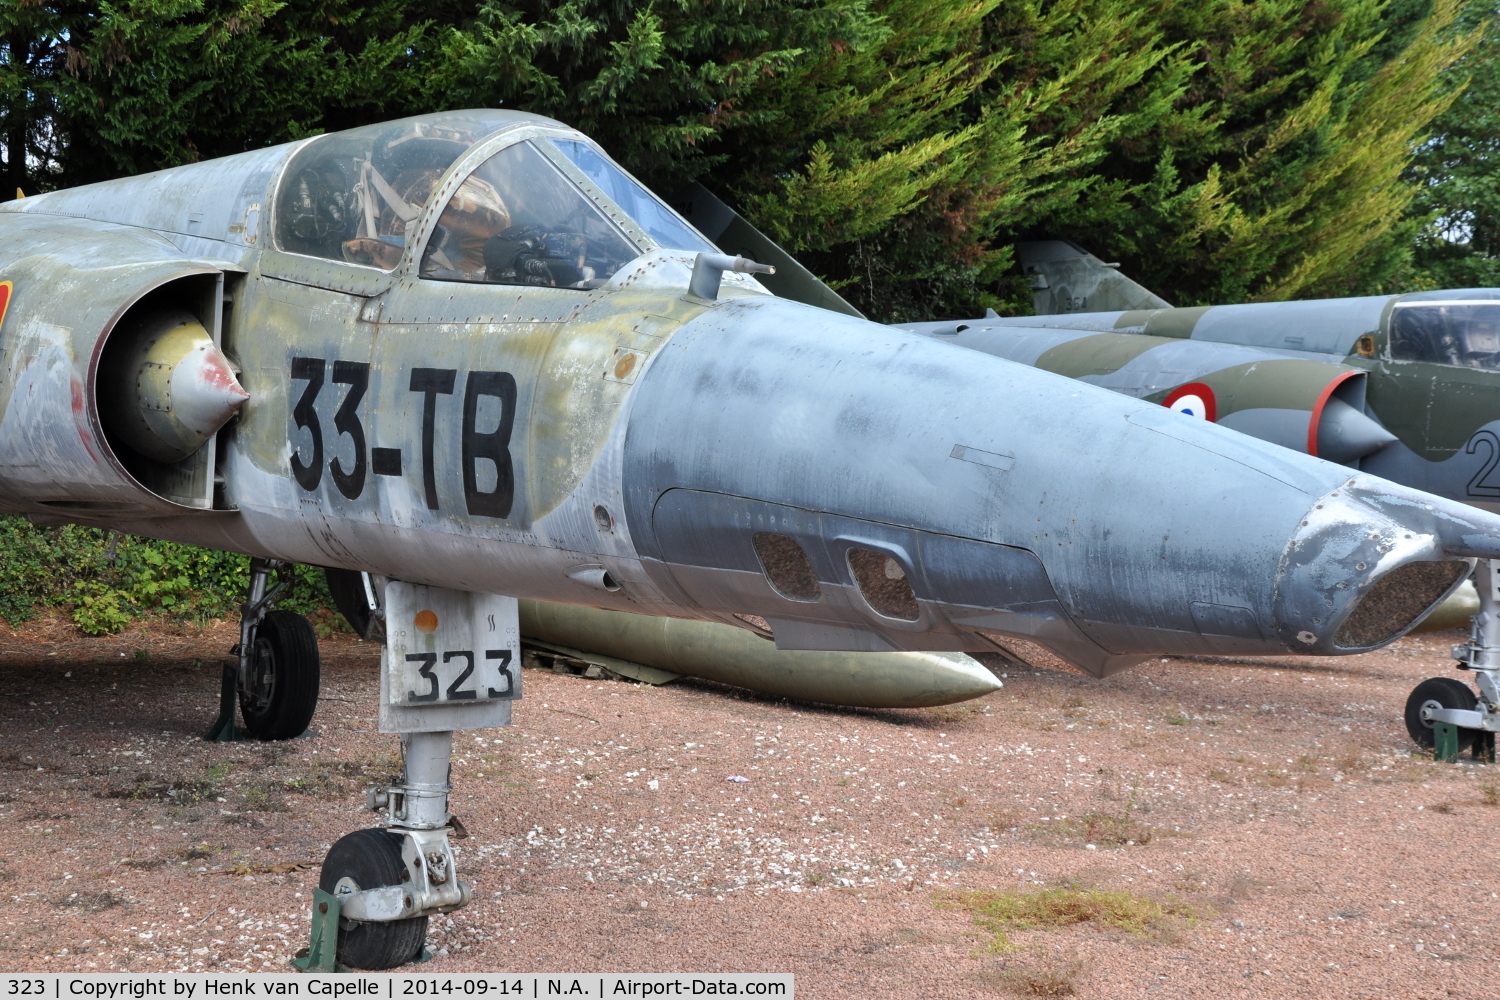 323, Dassault Mirage IIIR C/N 323, Dassault Mirage IIIR of the French Air Force preserved at the Chateau de Savigny aircraft museum.